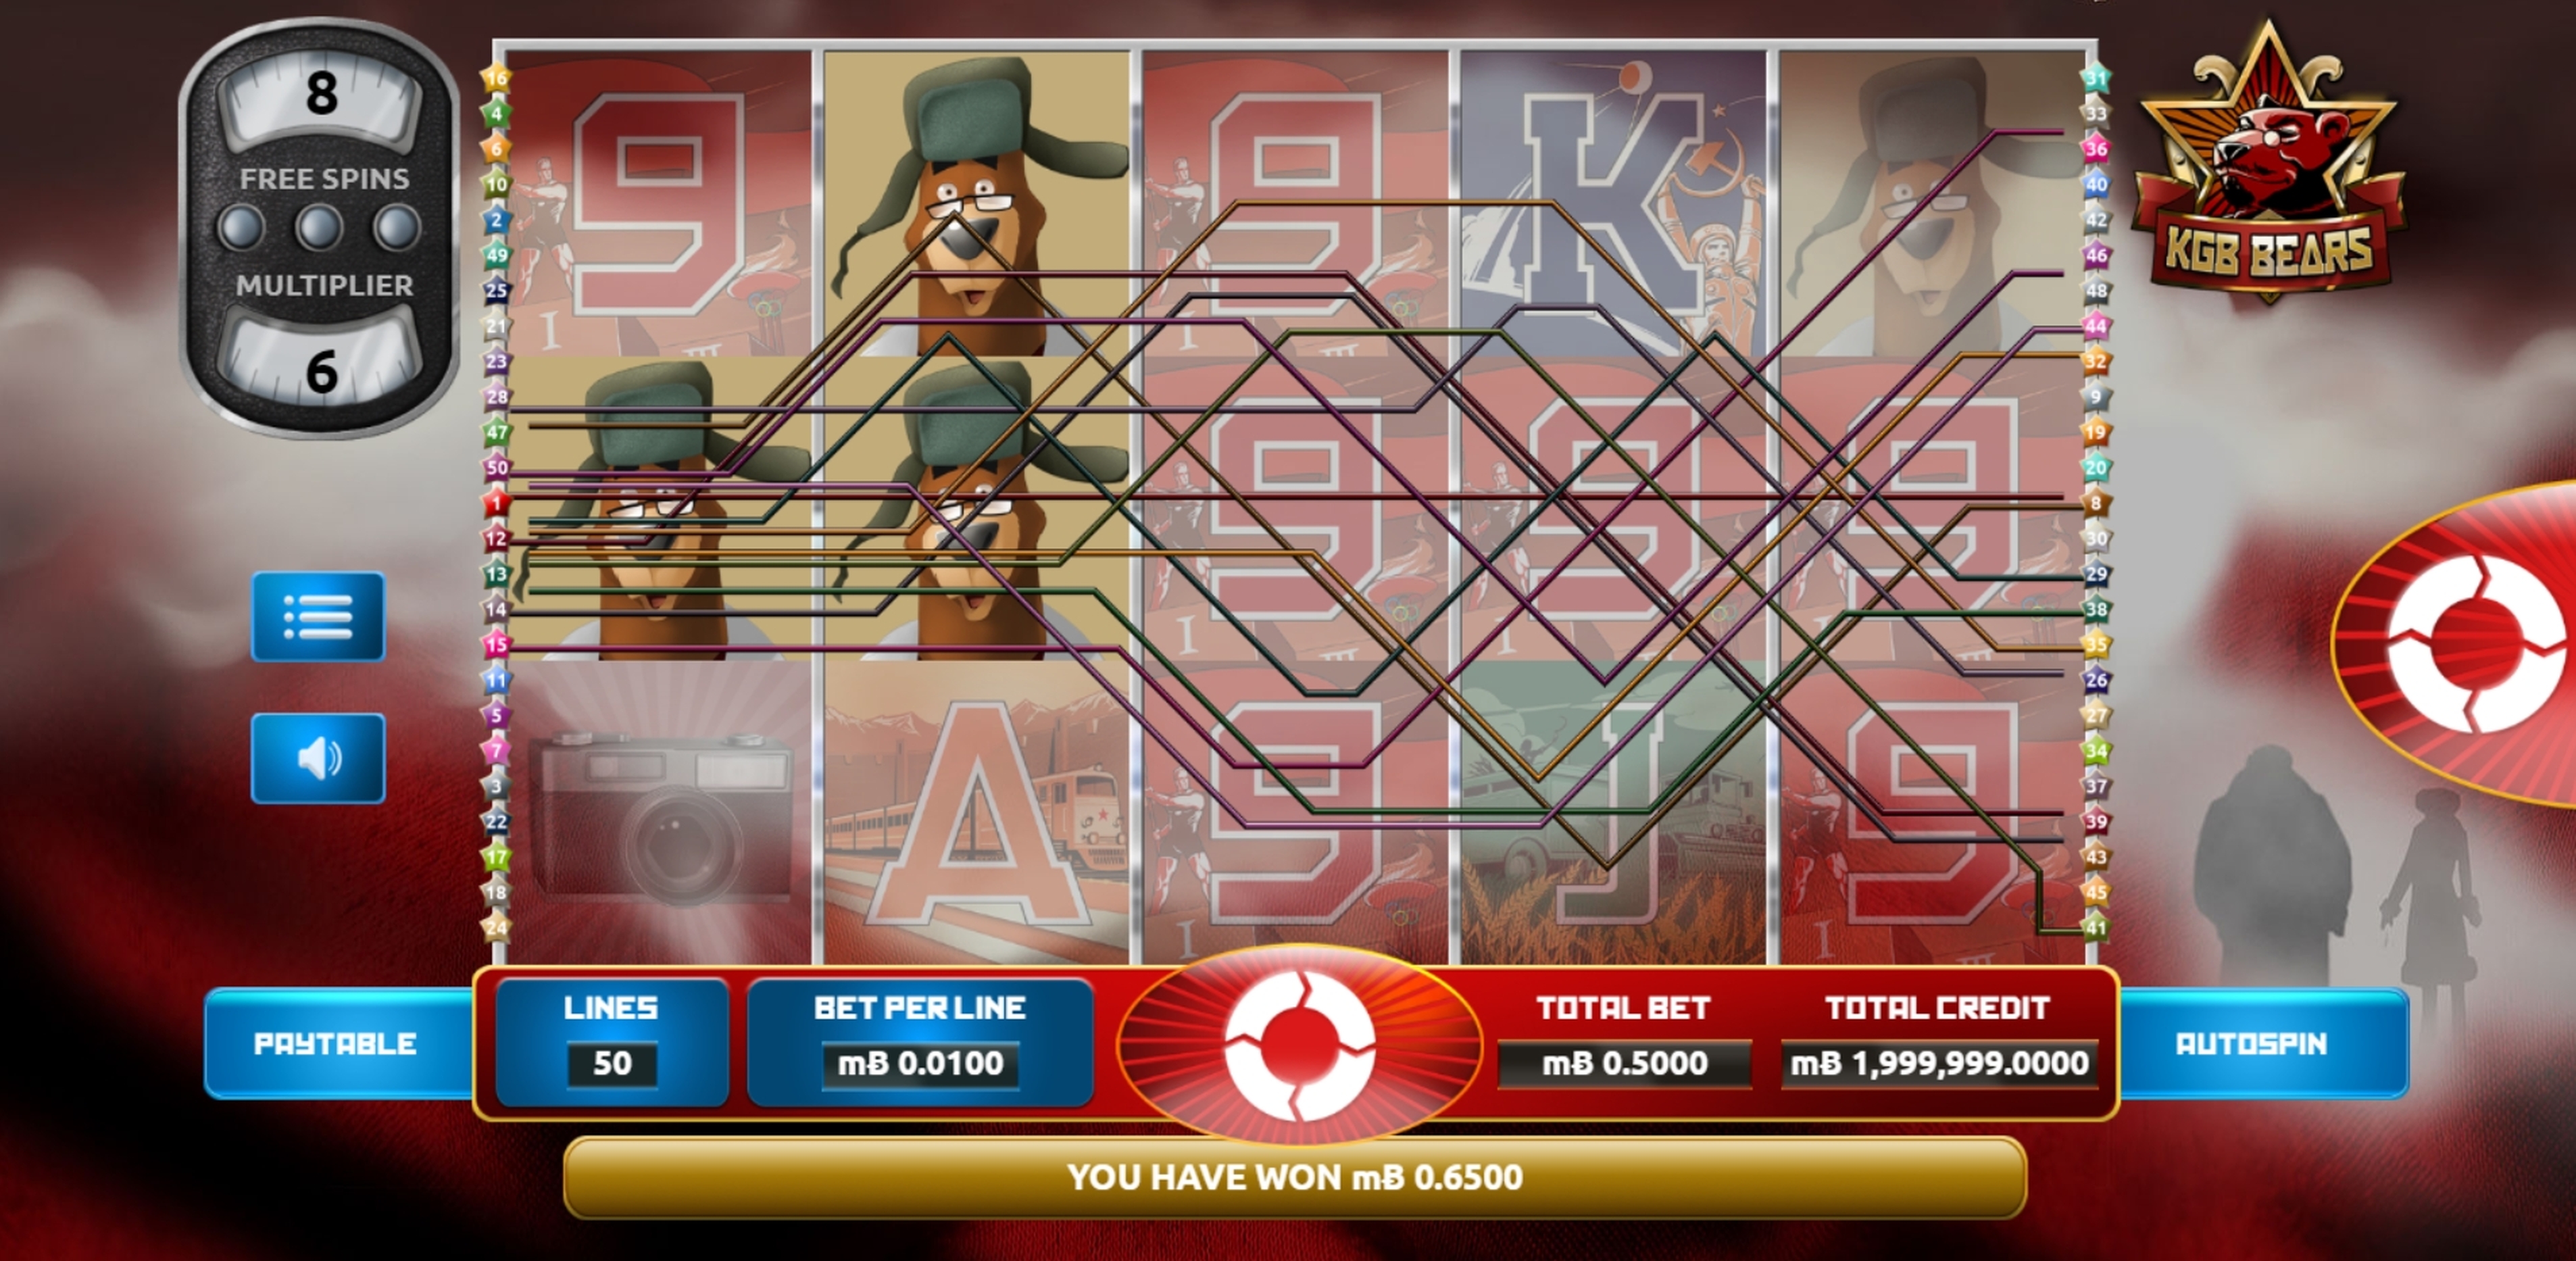 Win Money in KGB Bears Free Slot Game by The Games Company